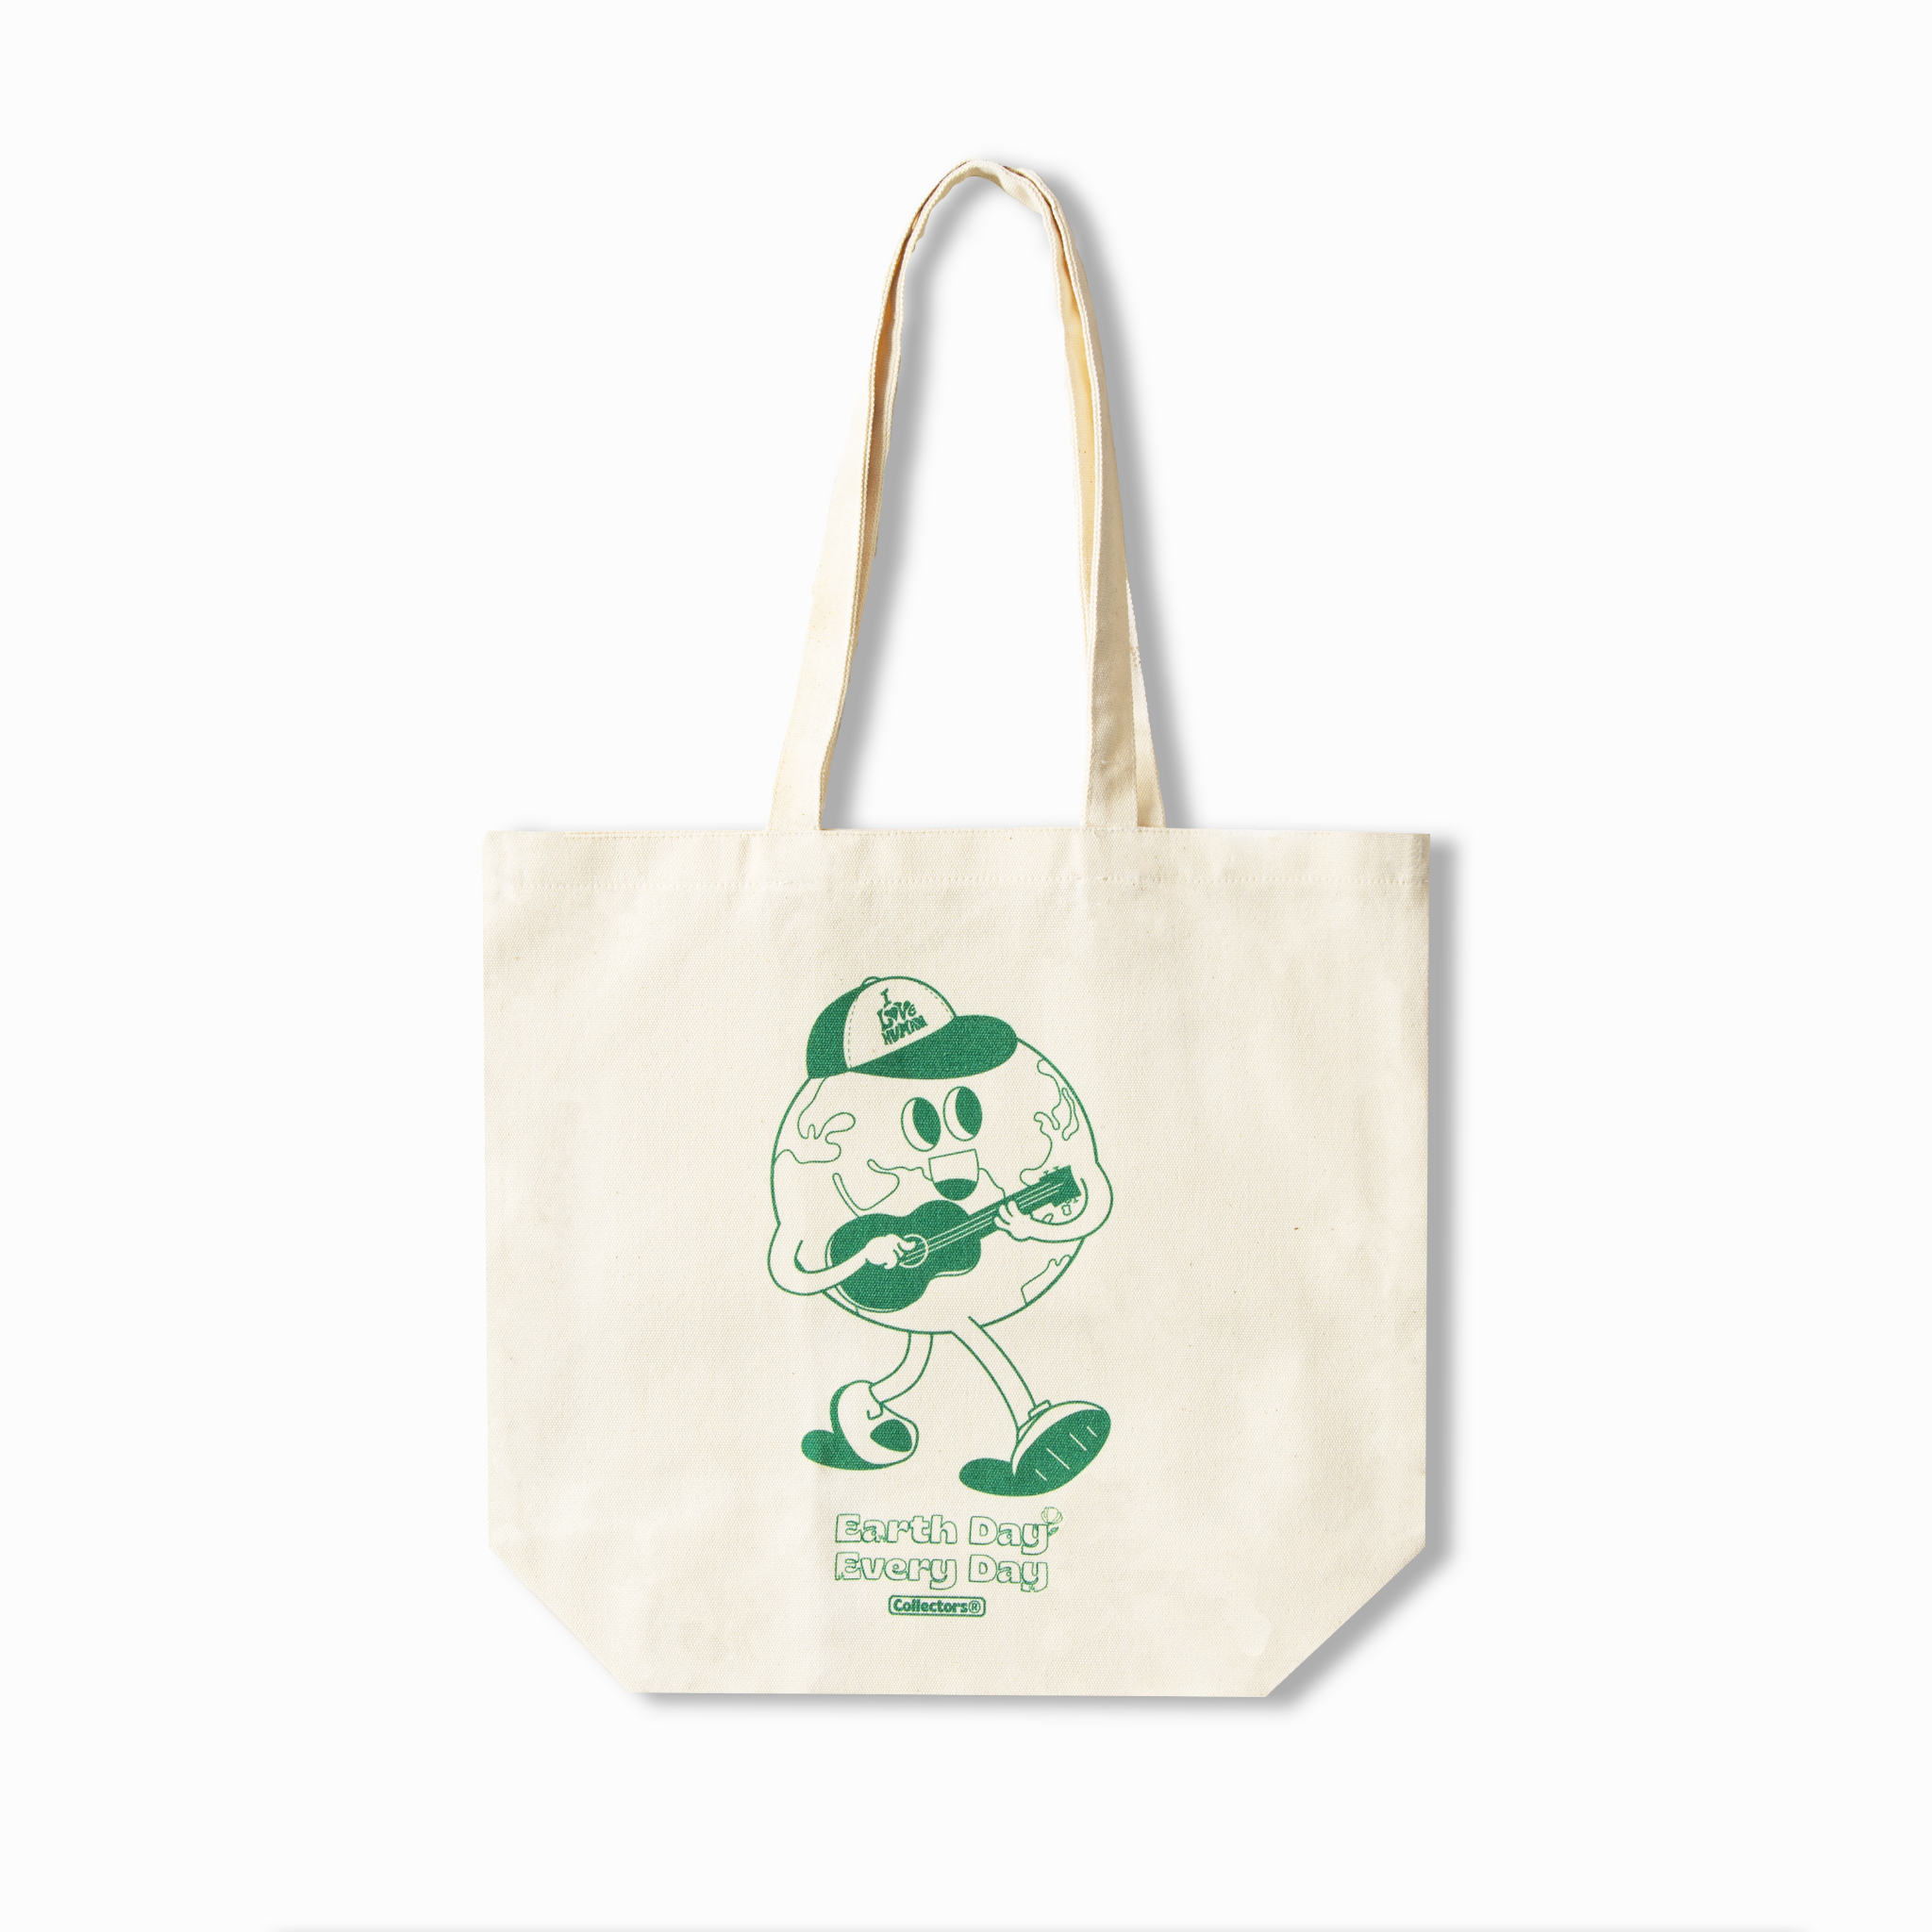  Earth Day Tote Bag “Every Day” 